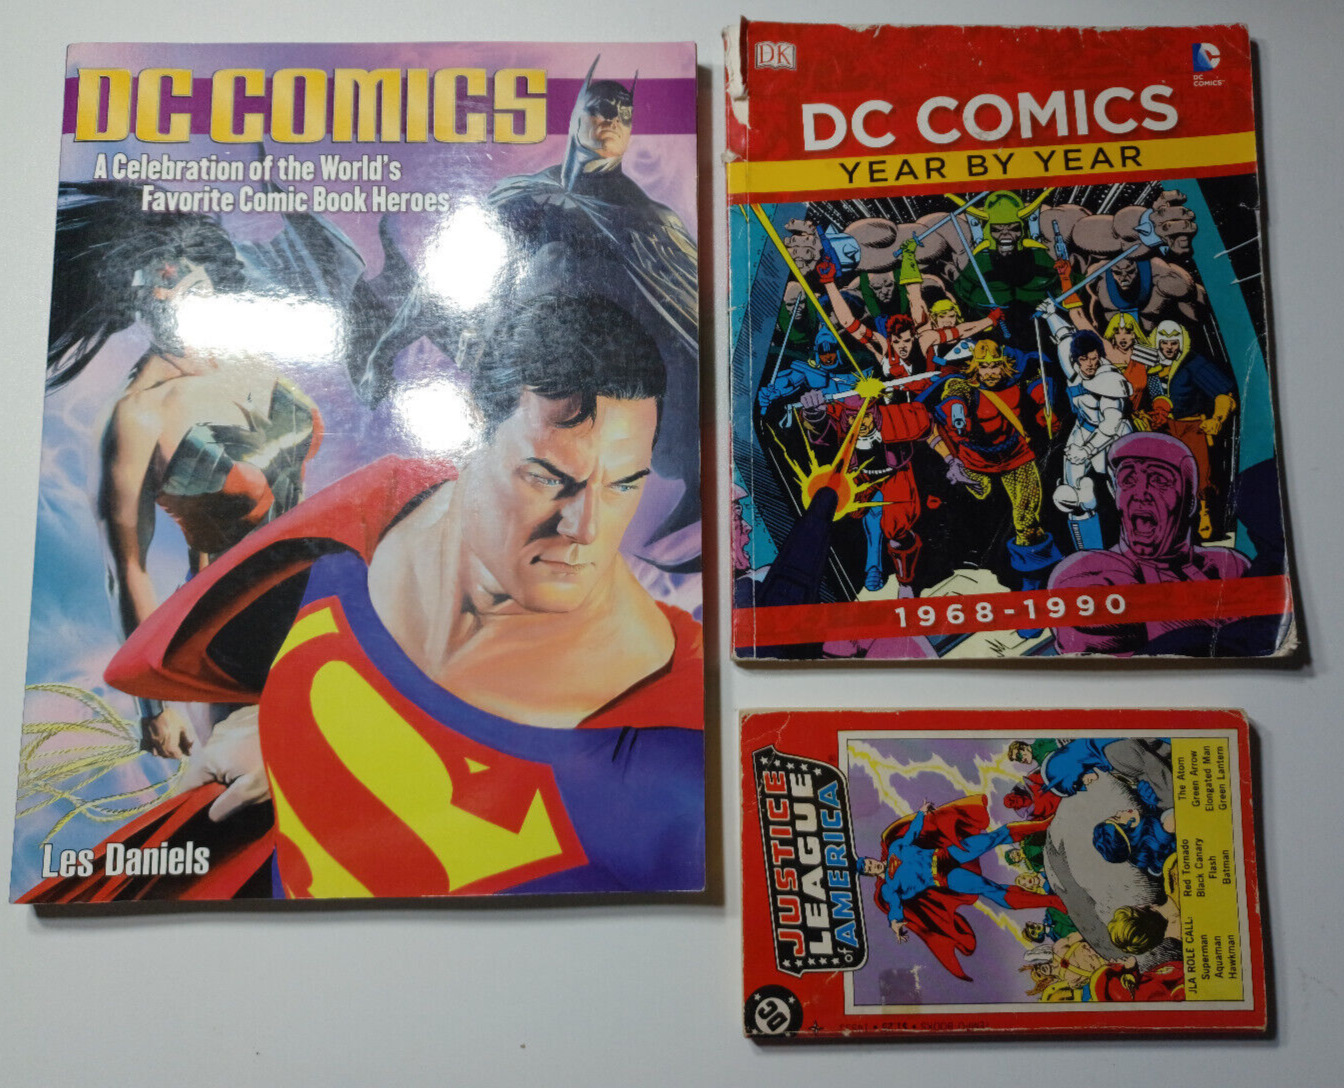 DC Comics A Celebration by Les Daniels, JLA Tempo Books Digest Year by Year 1968